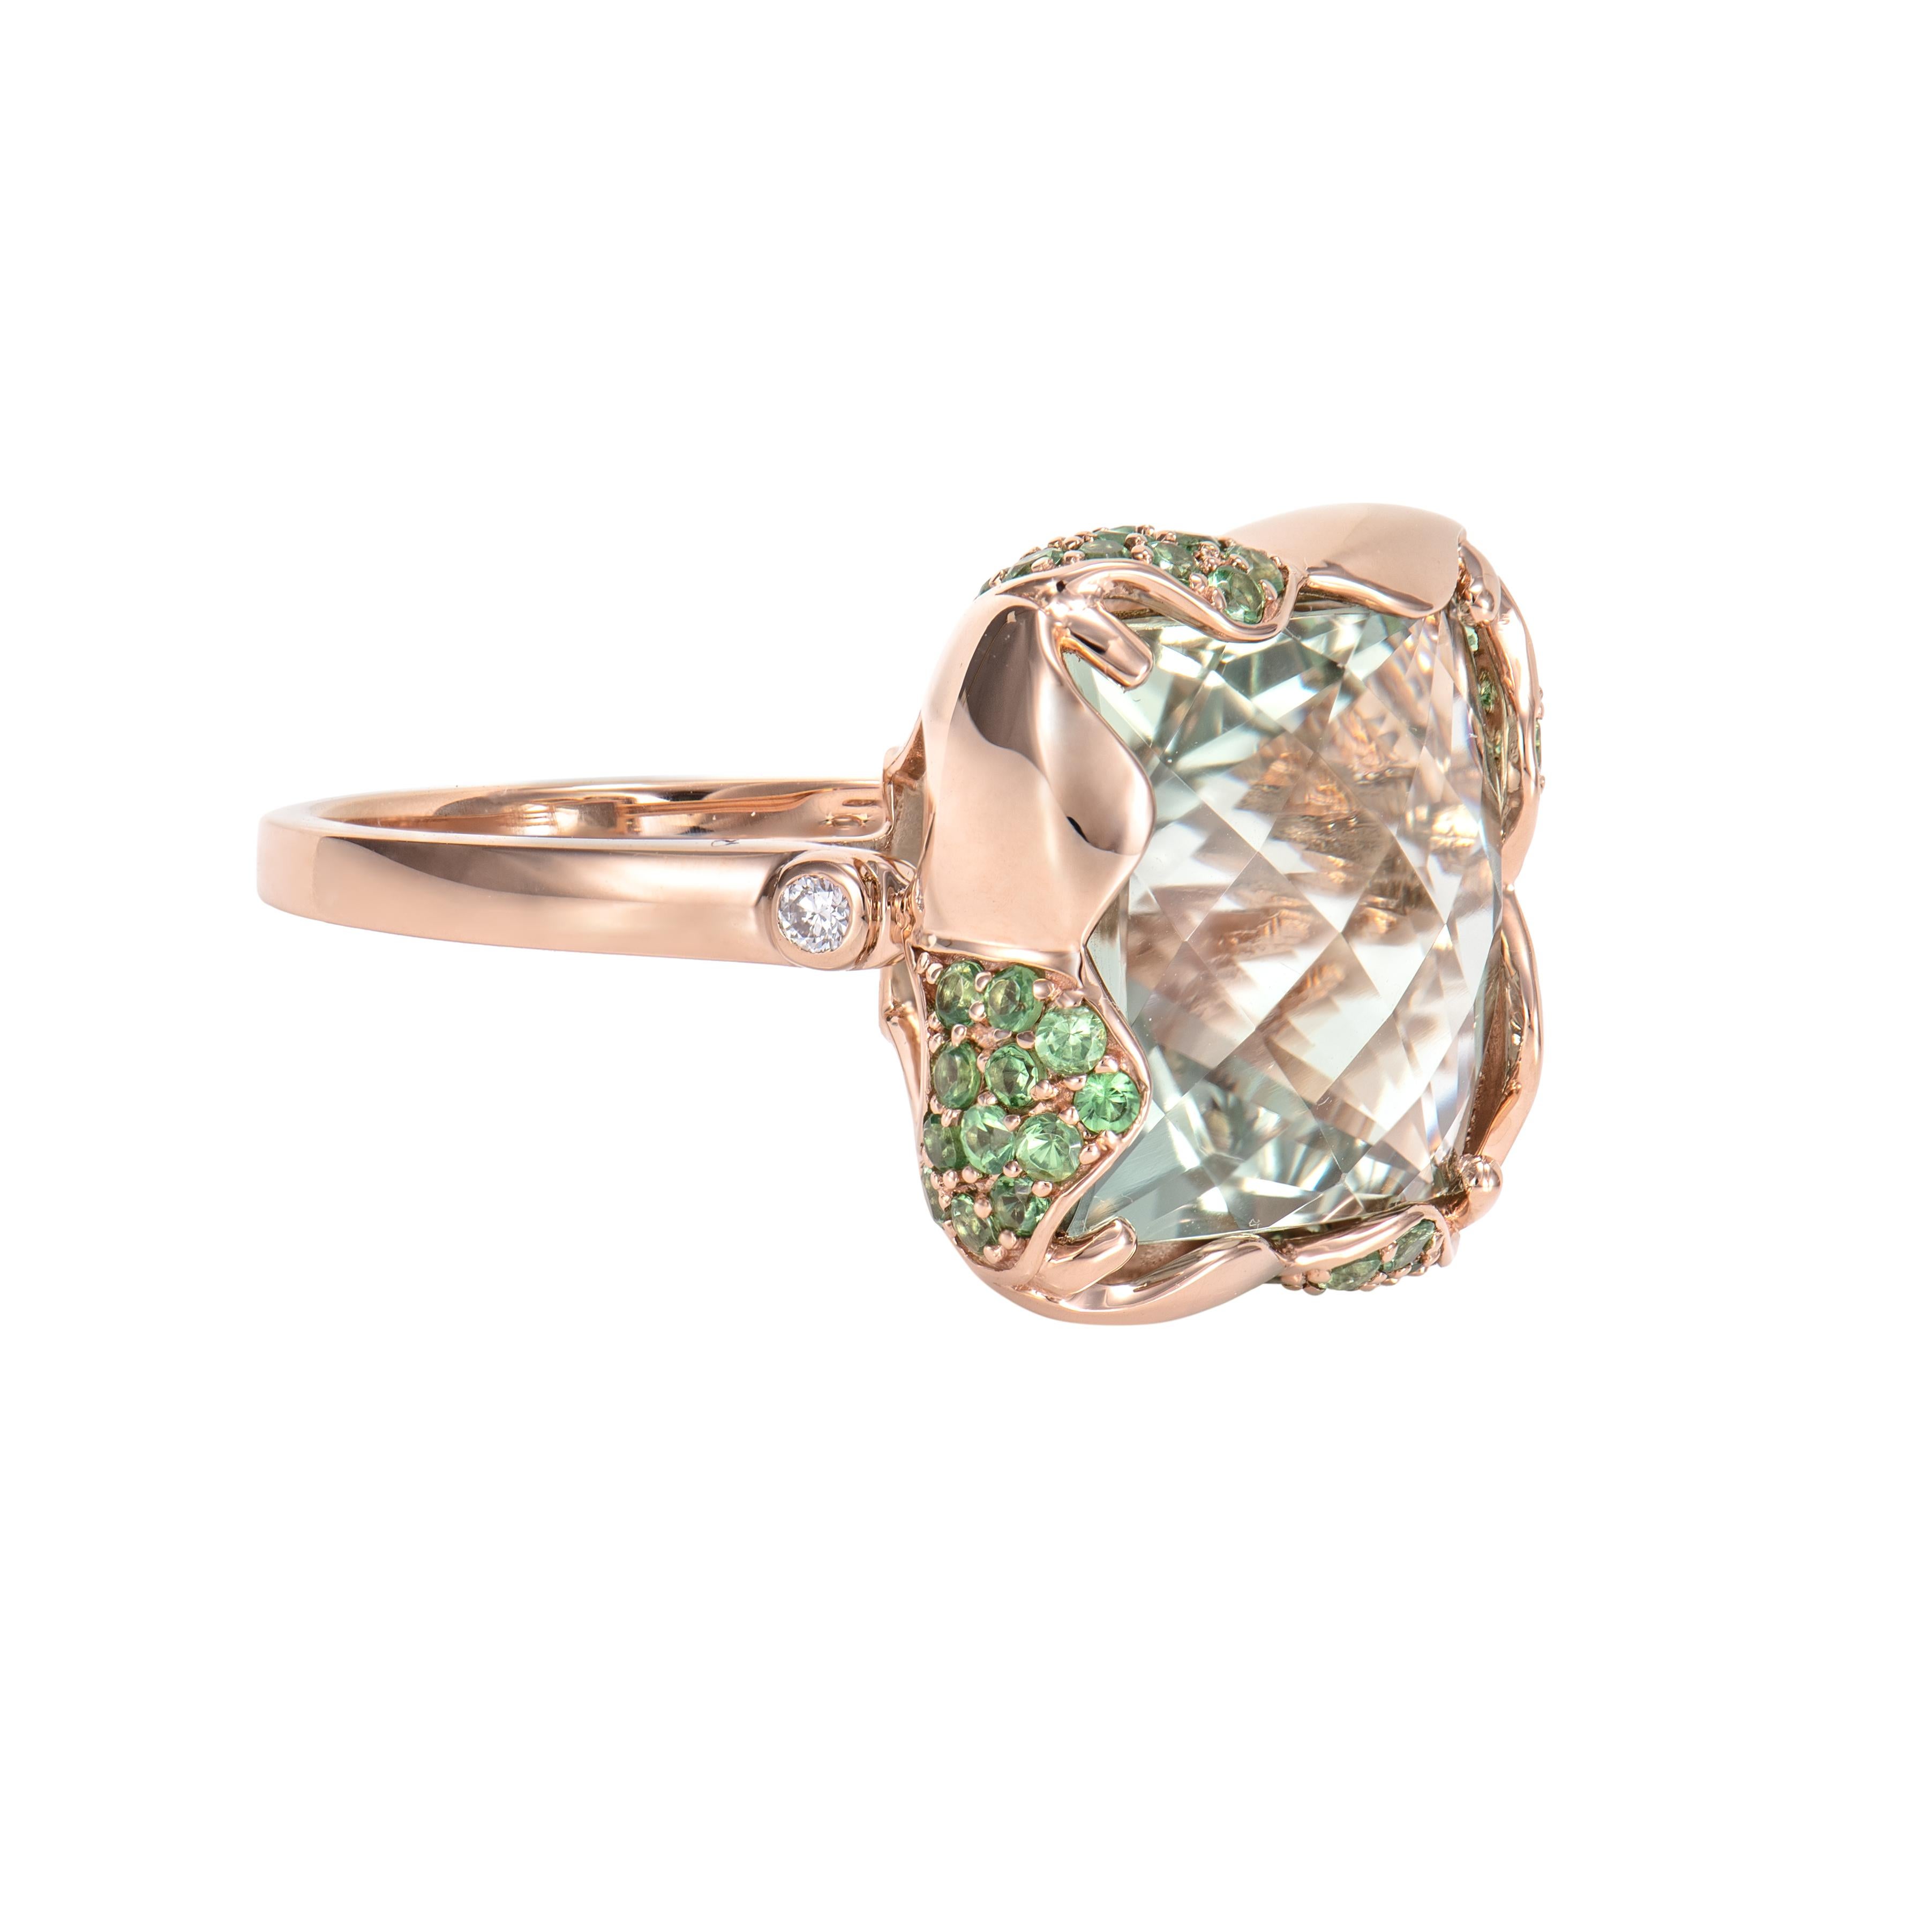 It's a fancy Mint Quartz Ring in a Square shape with checkerboard cut with Mint hue. The Ring are elegant and can be worn for many occasions. The Tsavorite stone around the ring add to the beauty and elegance of the ring. These beautiful gems make